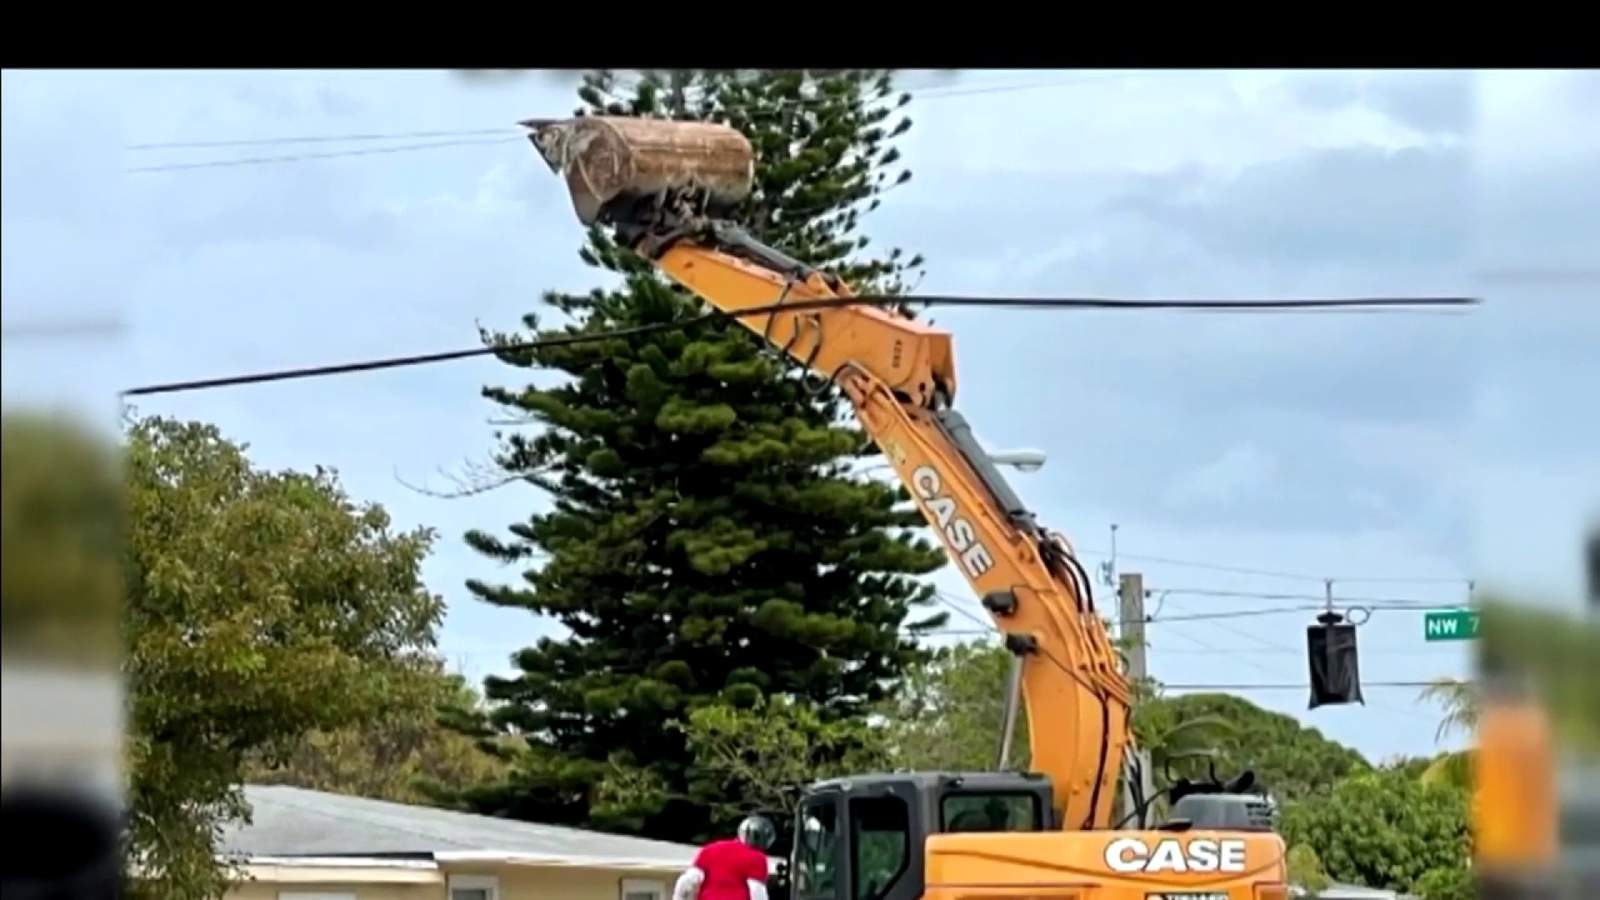 Power outage during Super Bowl likely caused by man joyriding excavator in Florida neighborhood